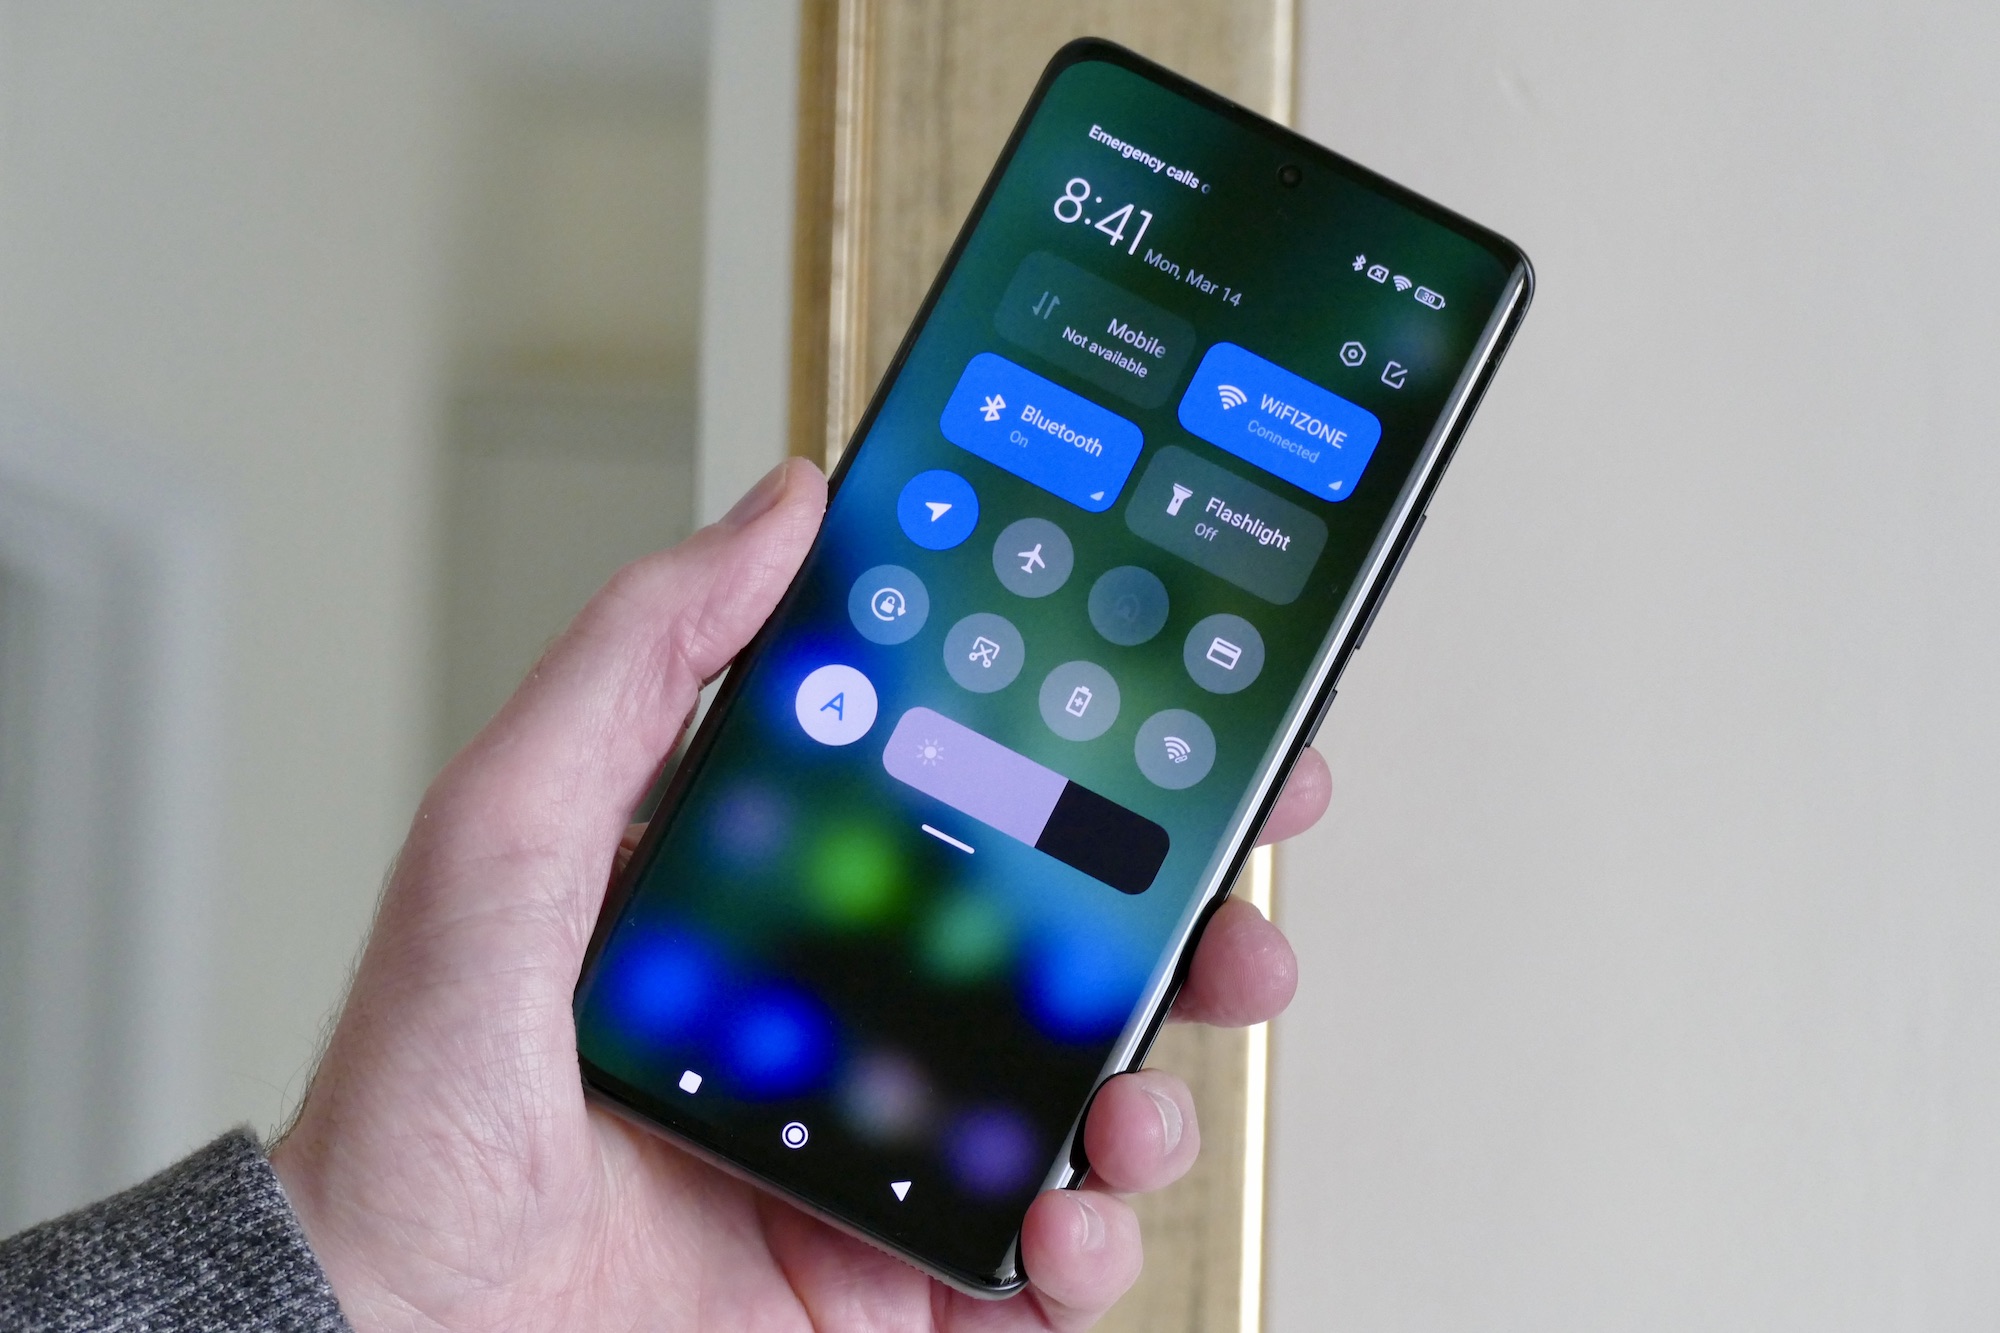 Xiaomi's 12 Pro Has Blisteringly Fast 120W Charging, Powerful Specs - CNET